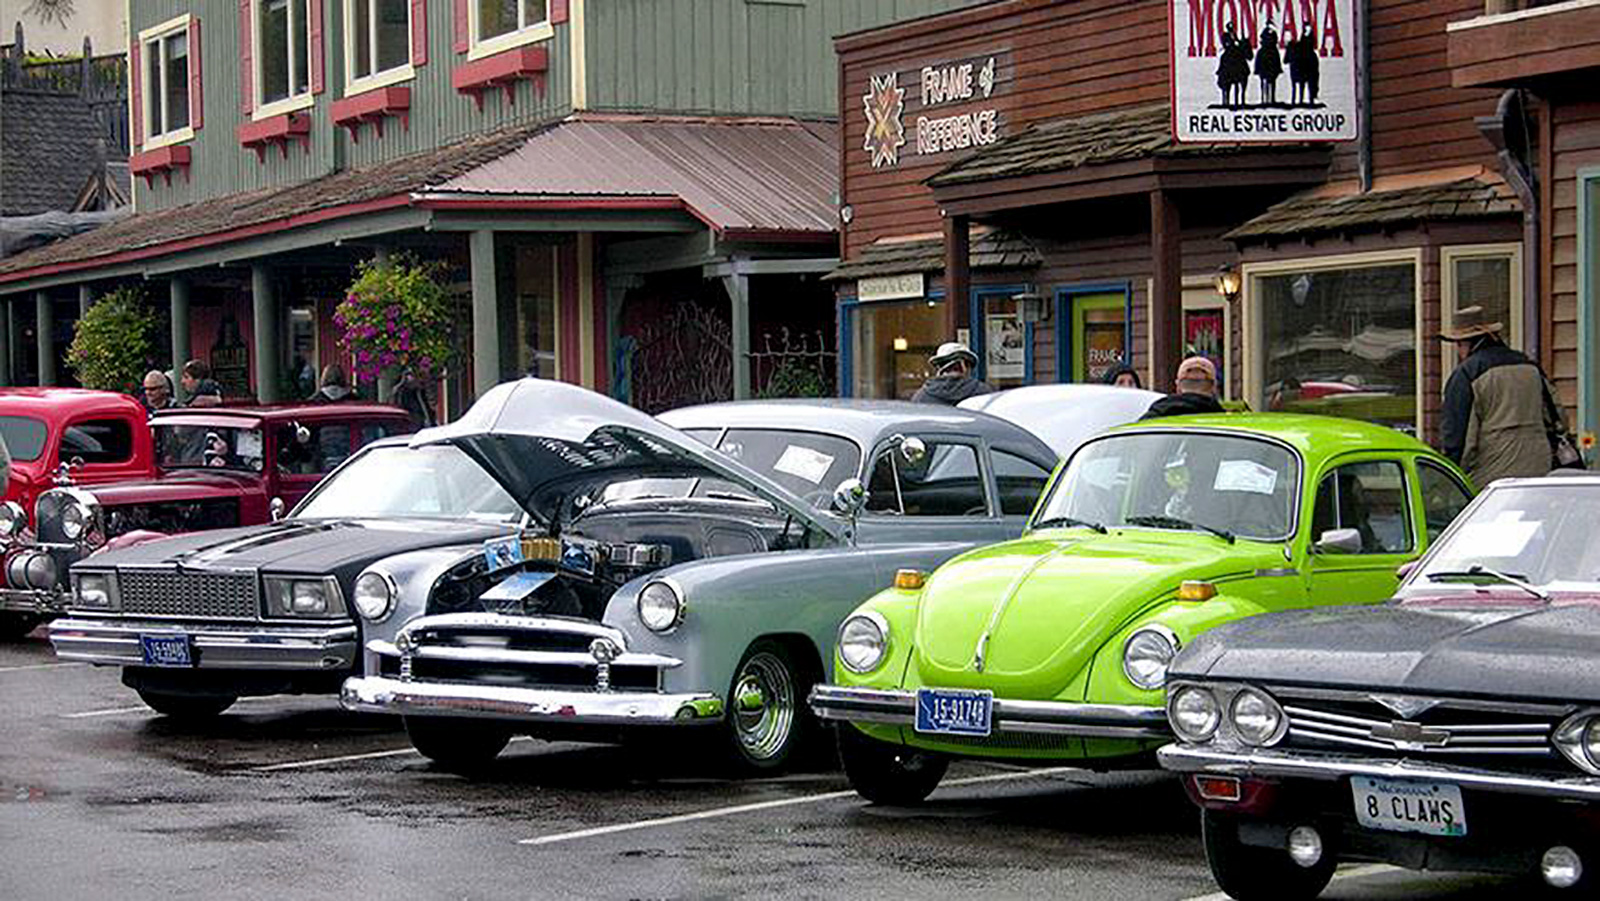 ‘Bug in the Bay’ to Feature Volkswagen Cars at Bigfork’s Rumble in the